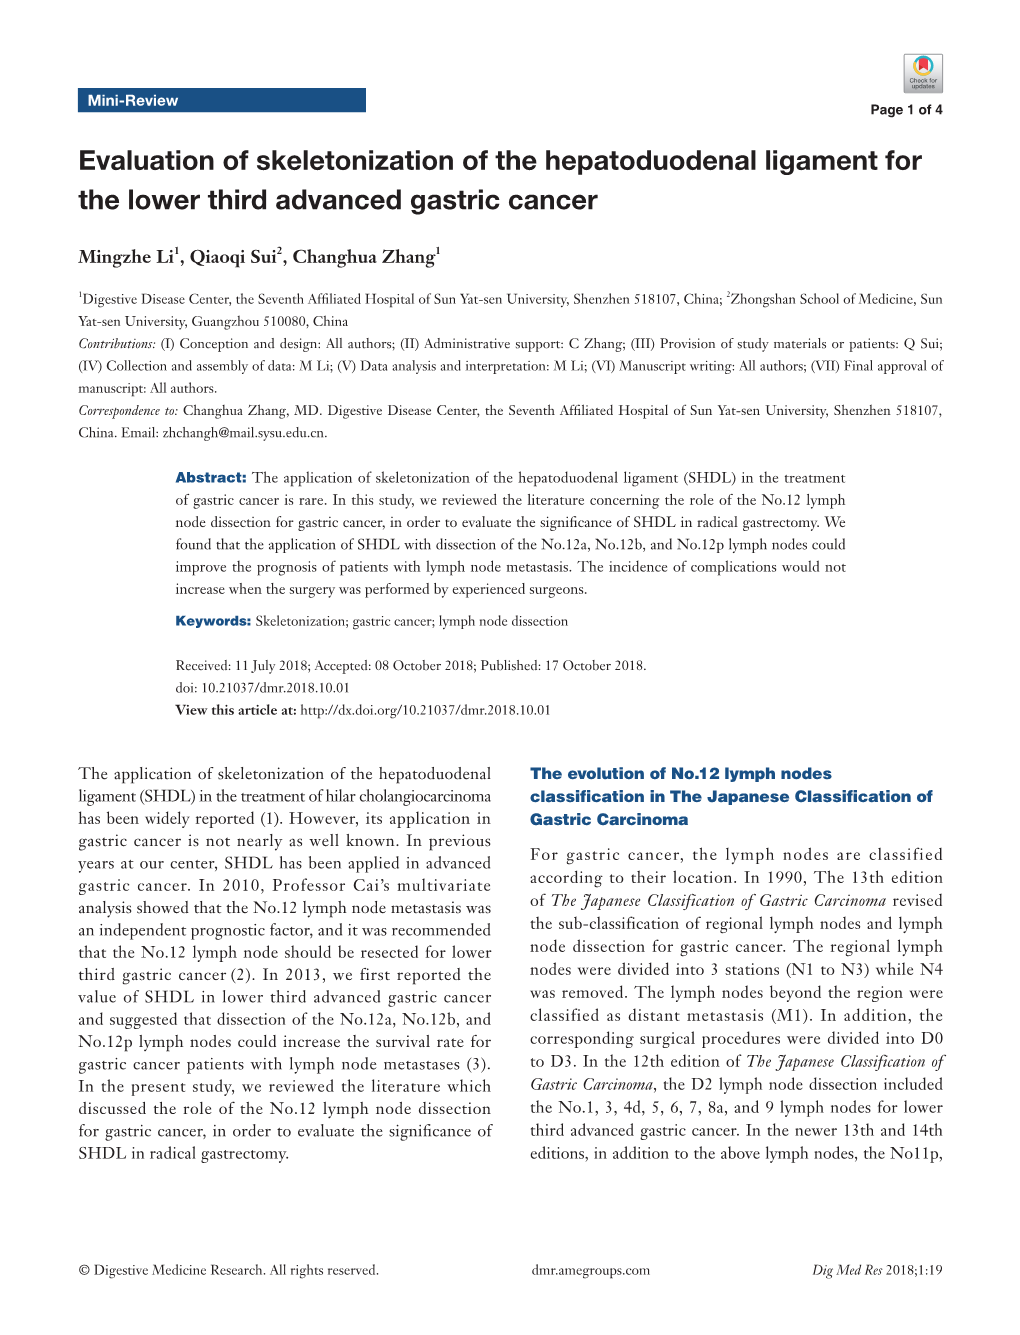 Evaluation of Skeletonization of the Hepatoduodenal Ligament for the Lower Third Advanced Gastric Cancer